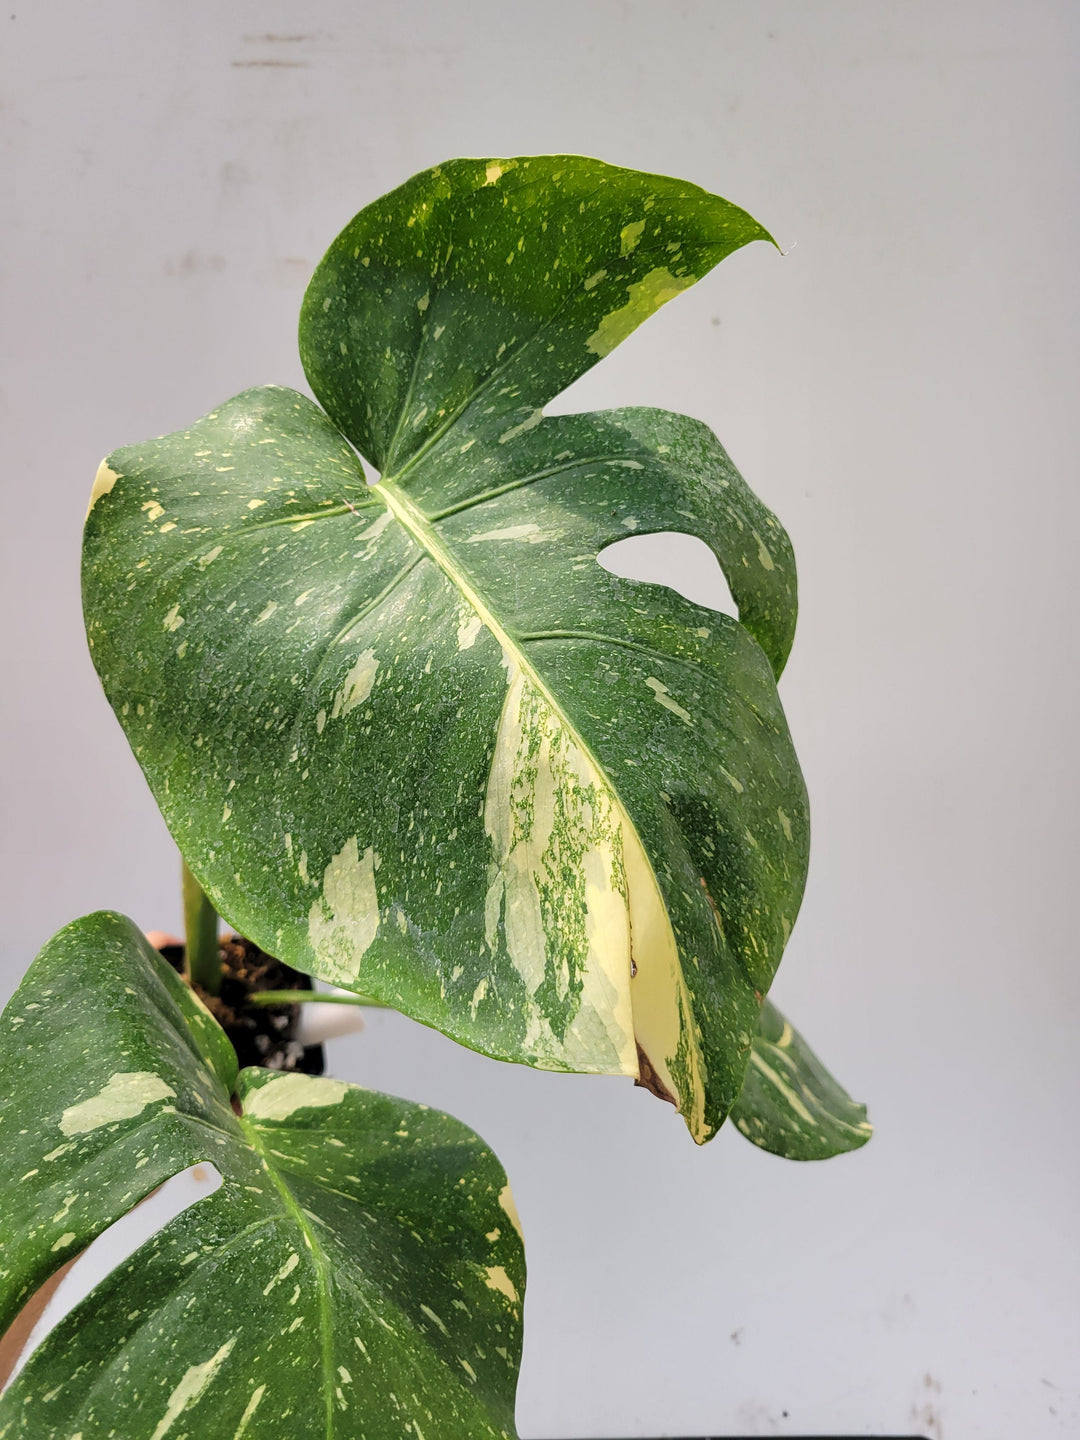 Monstera Thai Constellation,  XL size,  Highly variegated, Japanese Cultivar, exact plant pictured  US Seller #t41